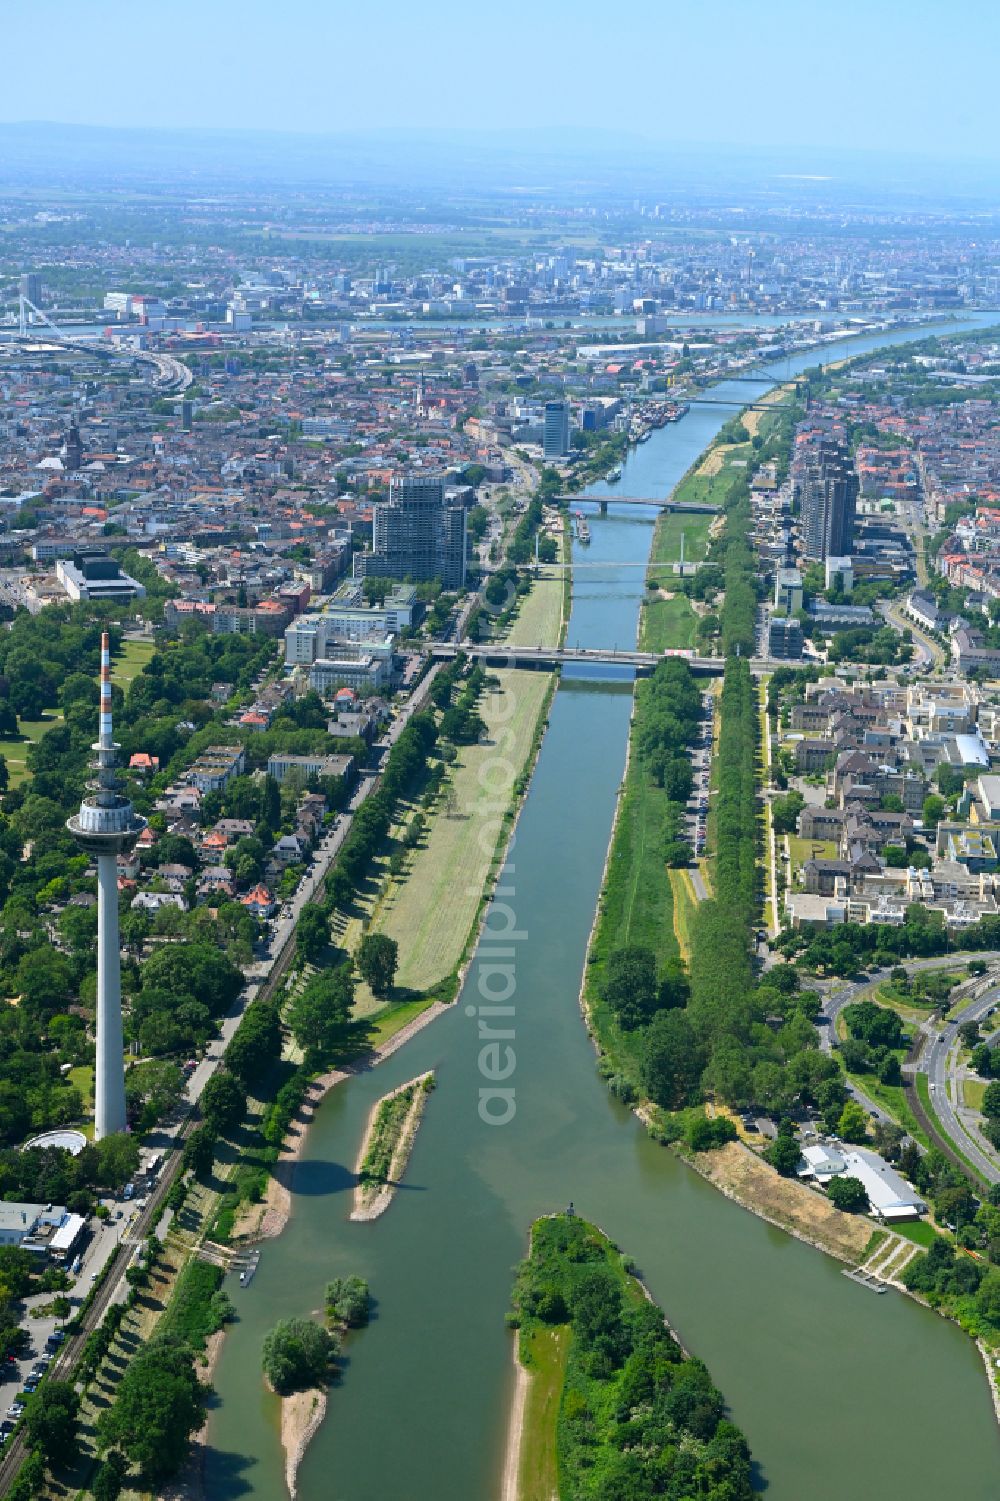 Mannheim from above - Riparian zones on the course of the river of the river Neckar on street Feudenheimer Strasse in the district Oststadt in Mannheim in the state Baden-Wuerttemberg, Germany